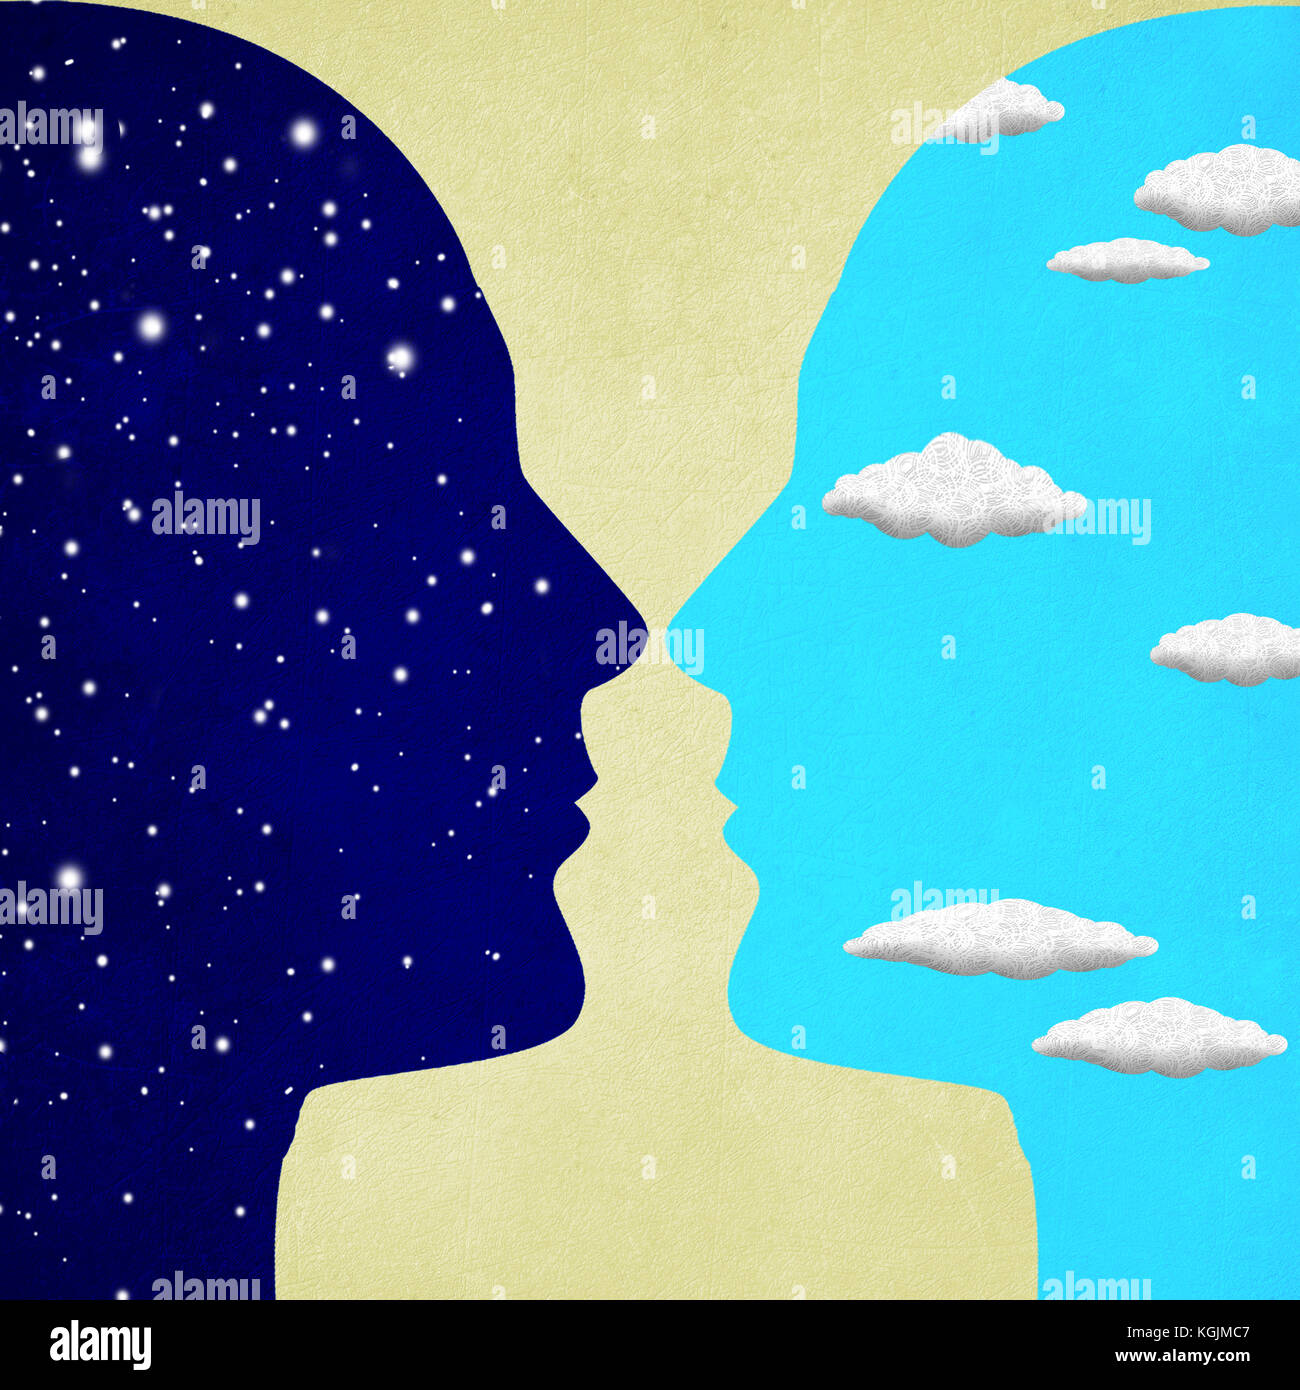 two human heads night and day concept digital illustration Stock Photo